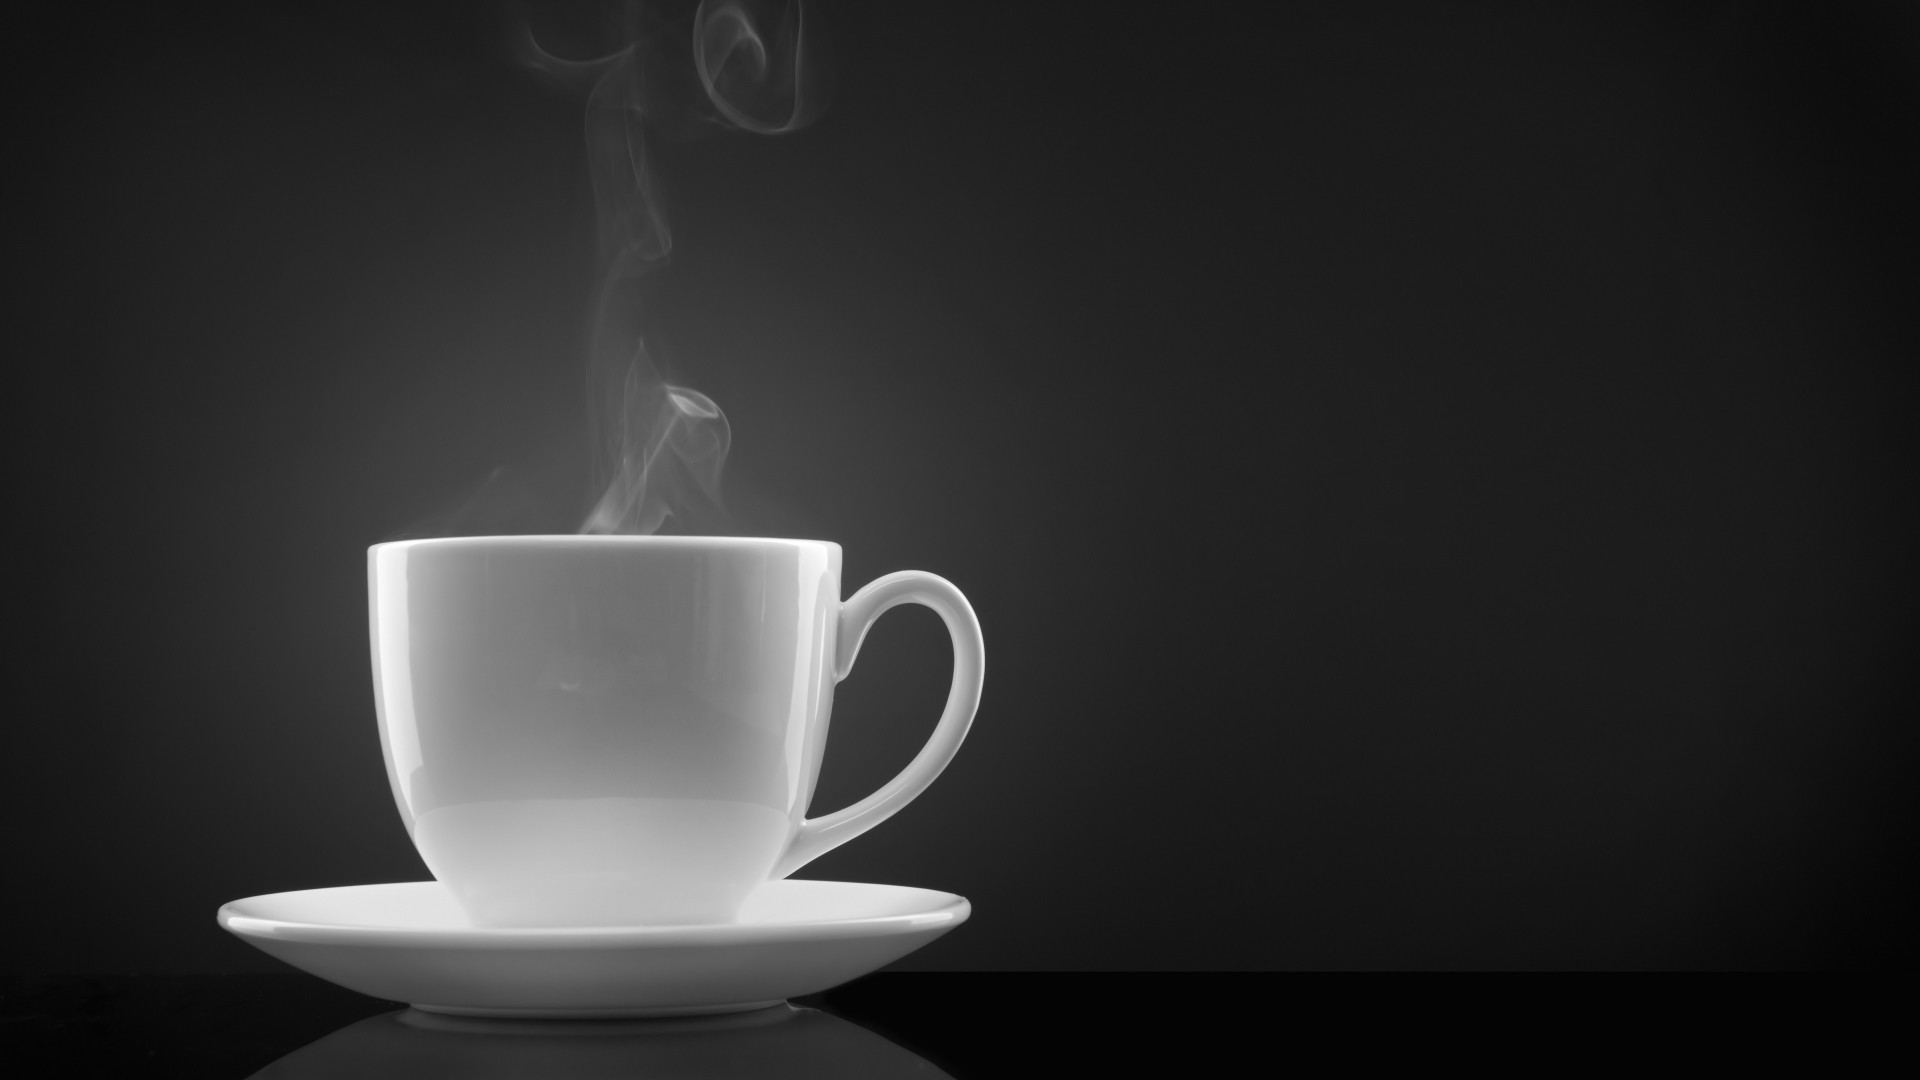 1920x1080  Wallpaper coffee, steam, cup, black background